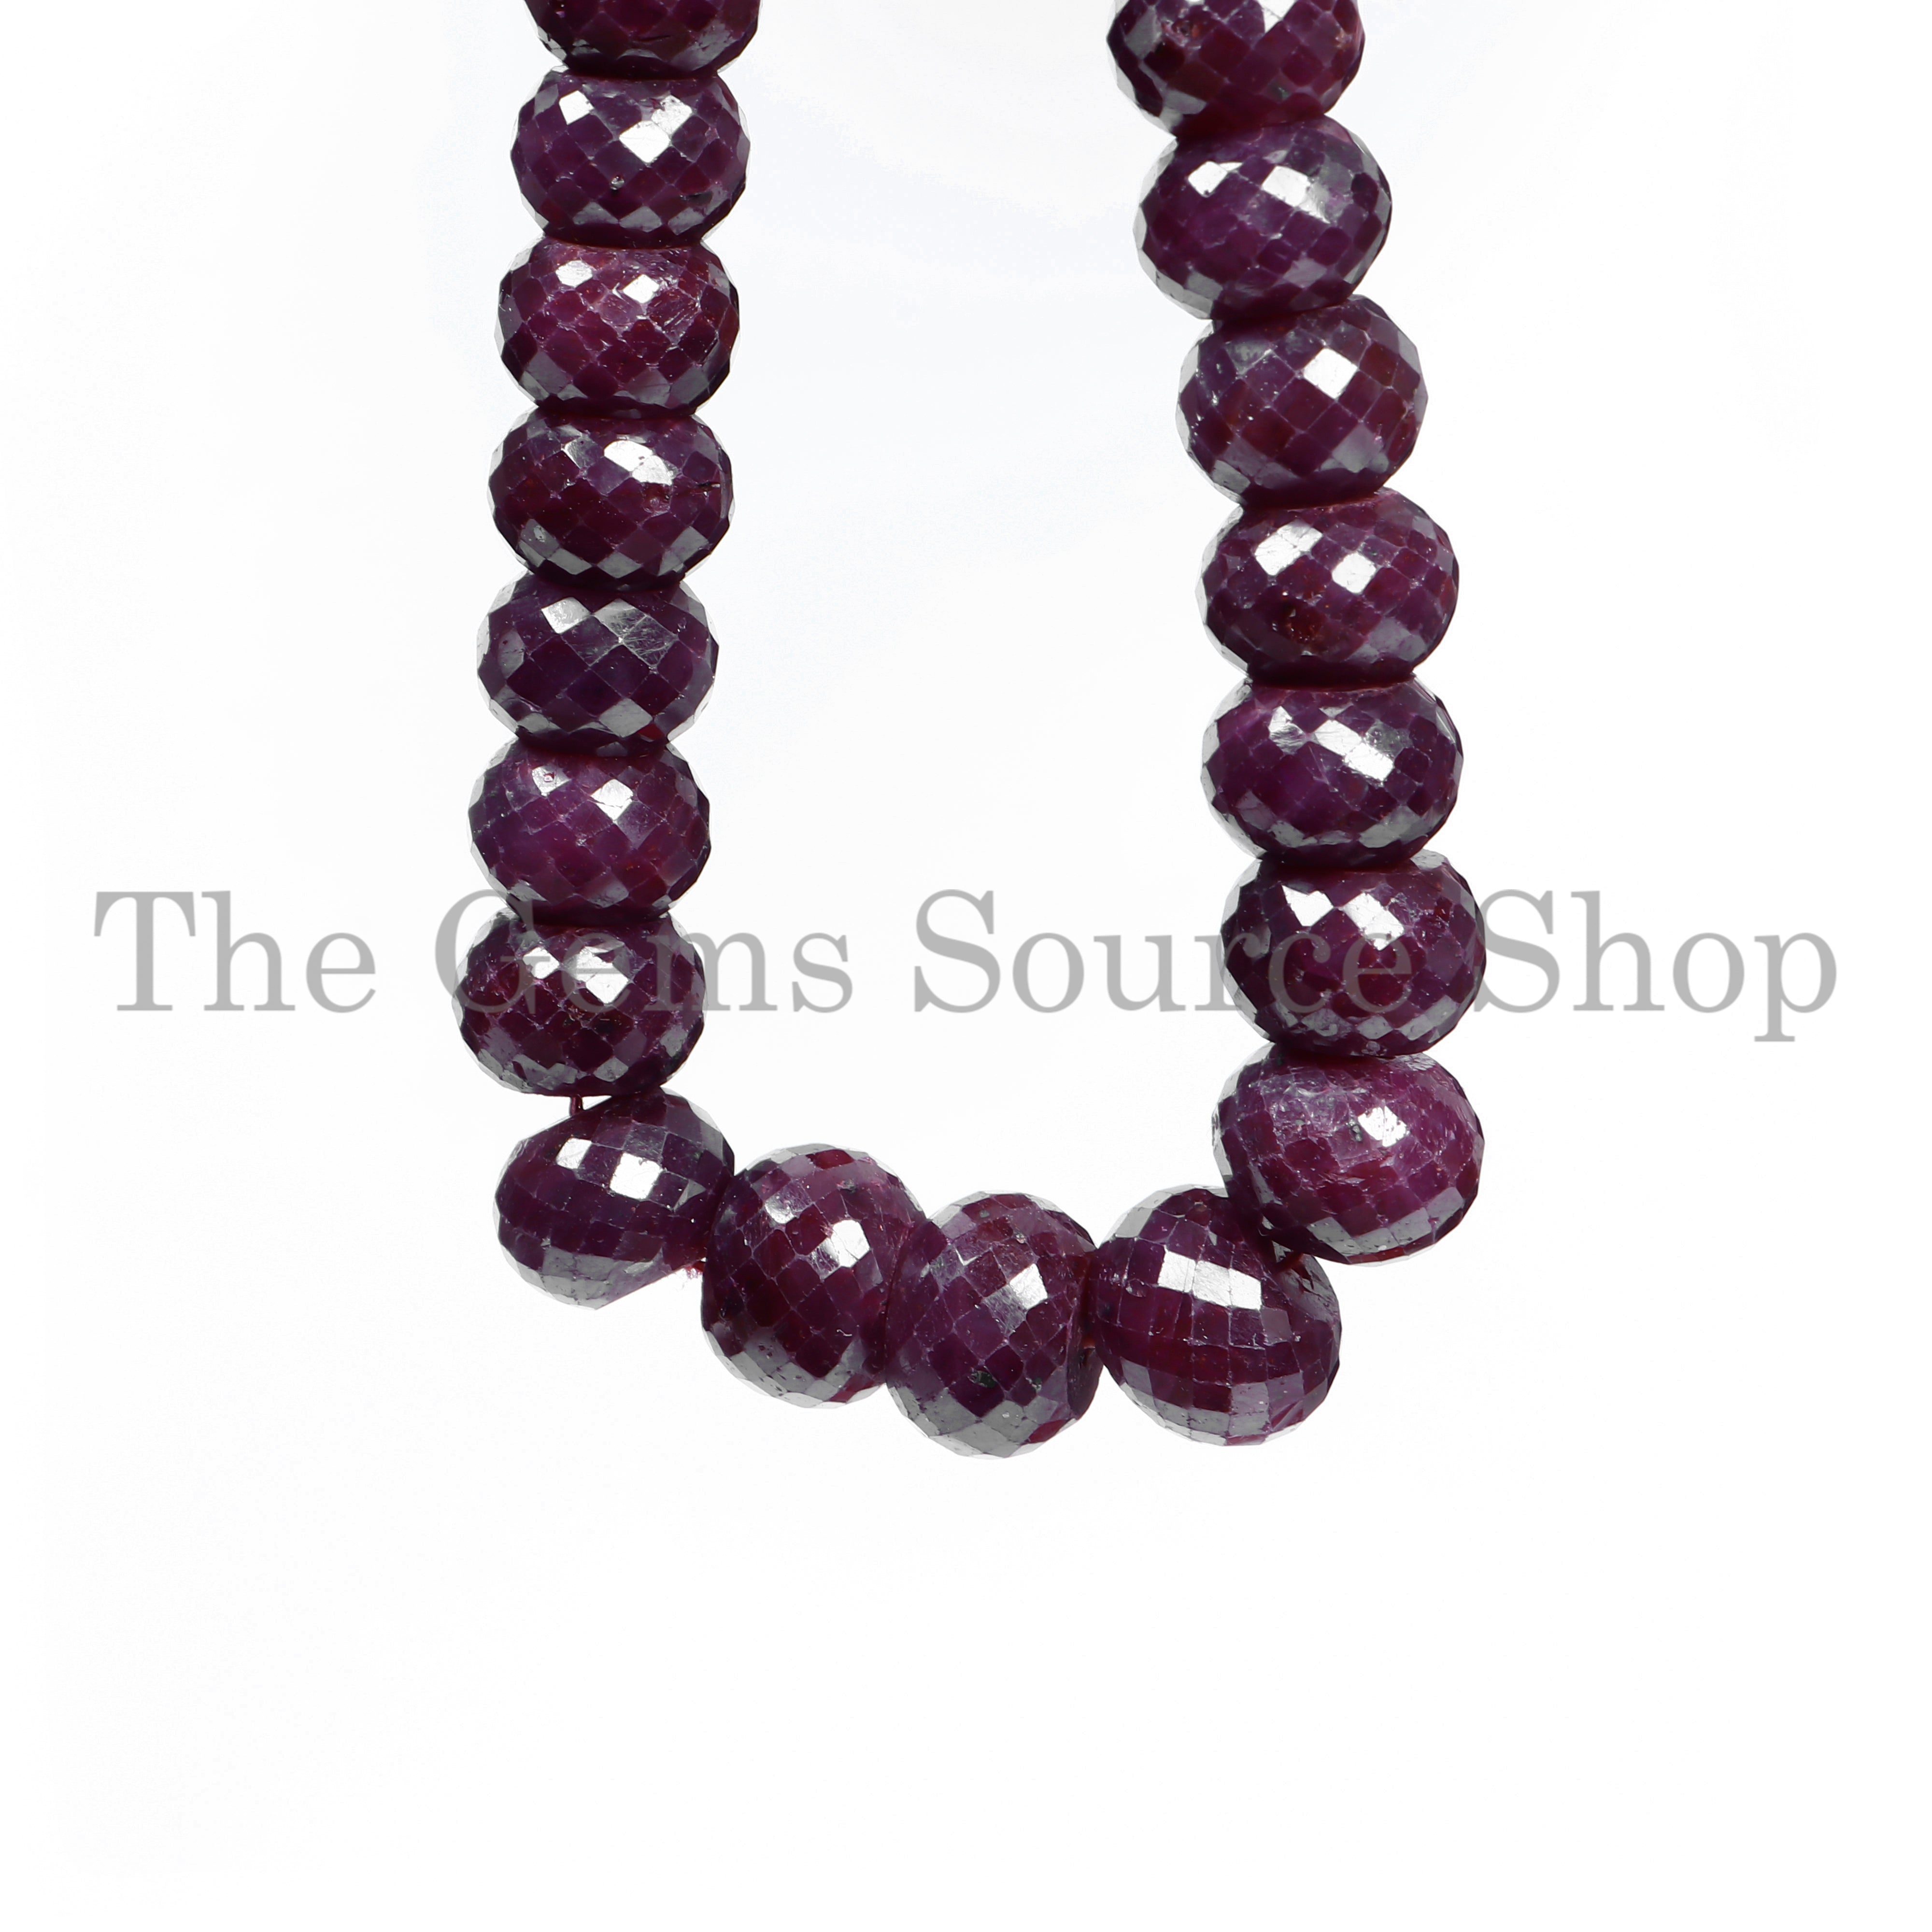 Top Quality Ruby Beads, Ruby Rondelle Beads, Ruby Faceted Beads, Ruby Gemstone Beads